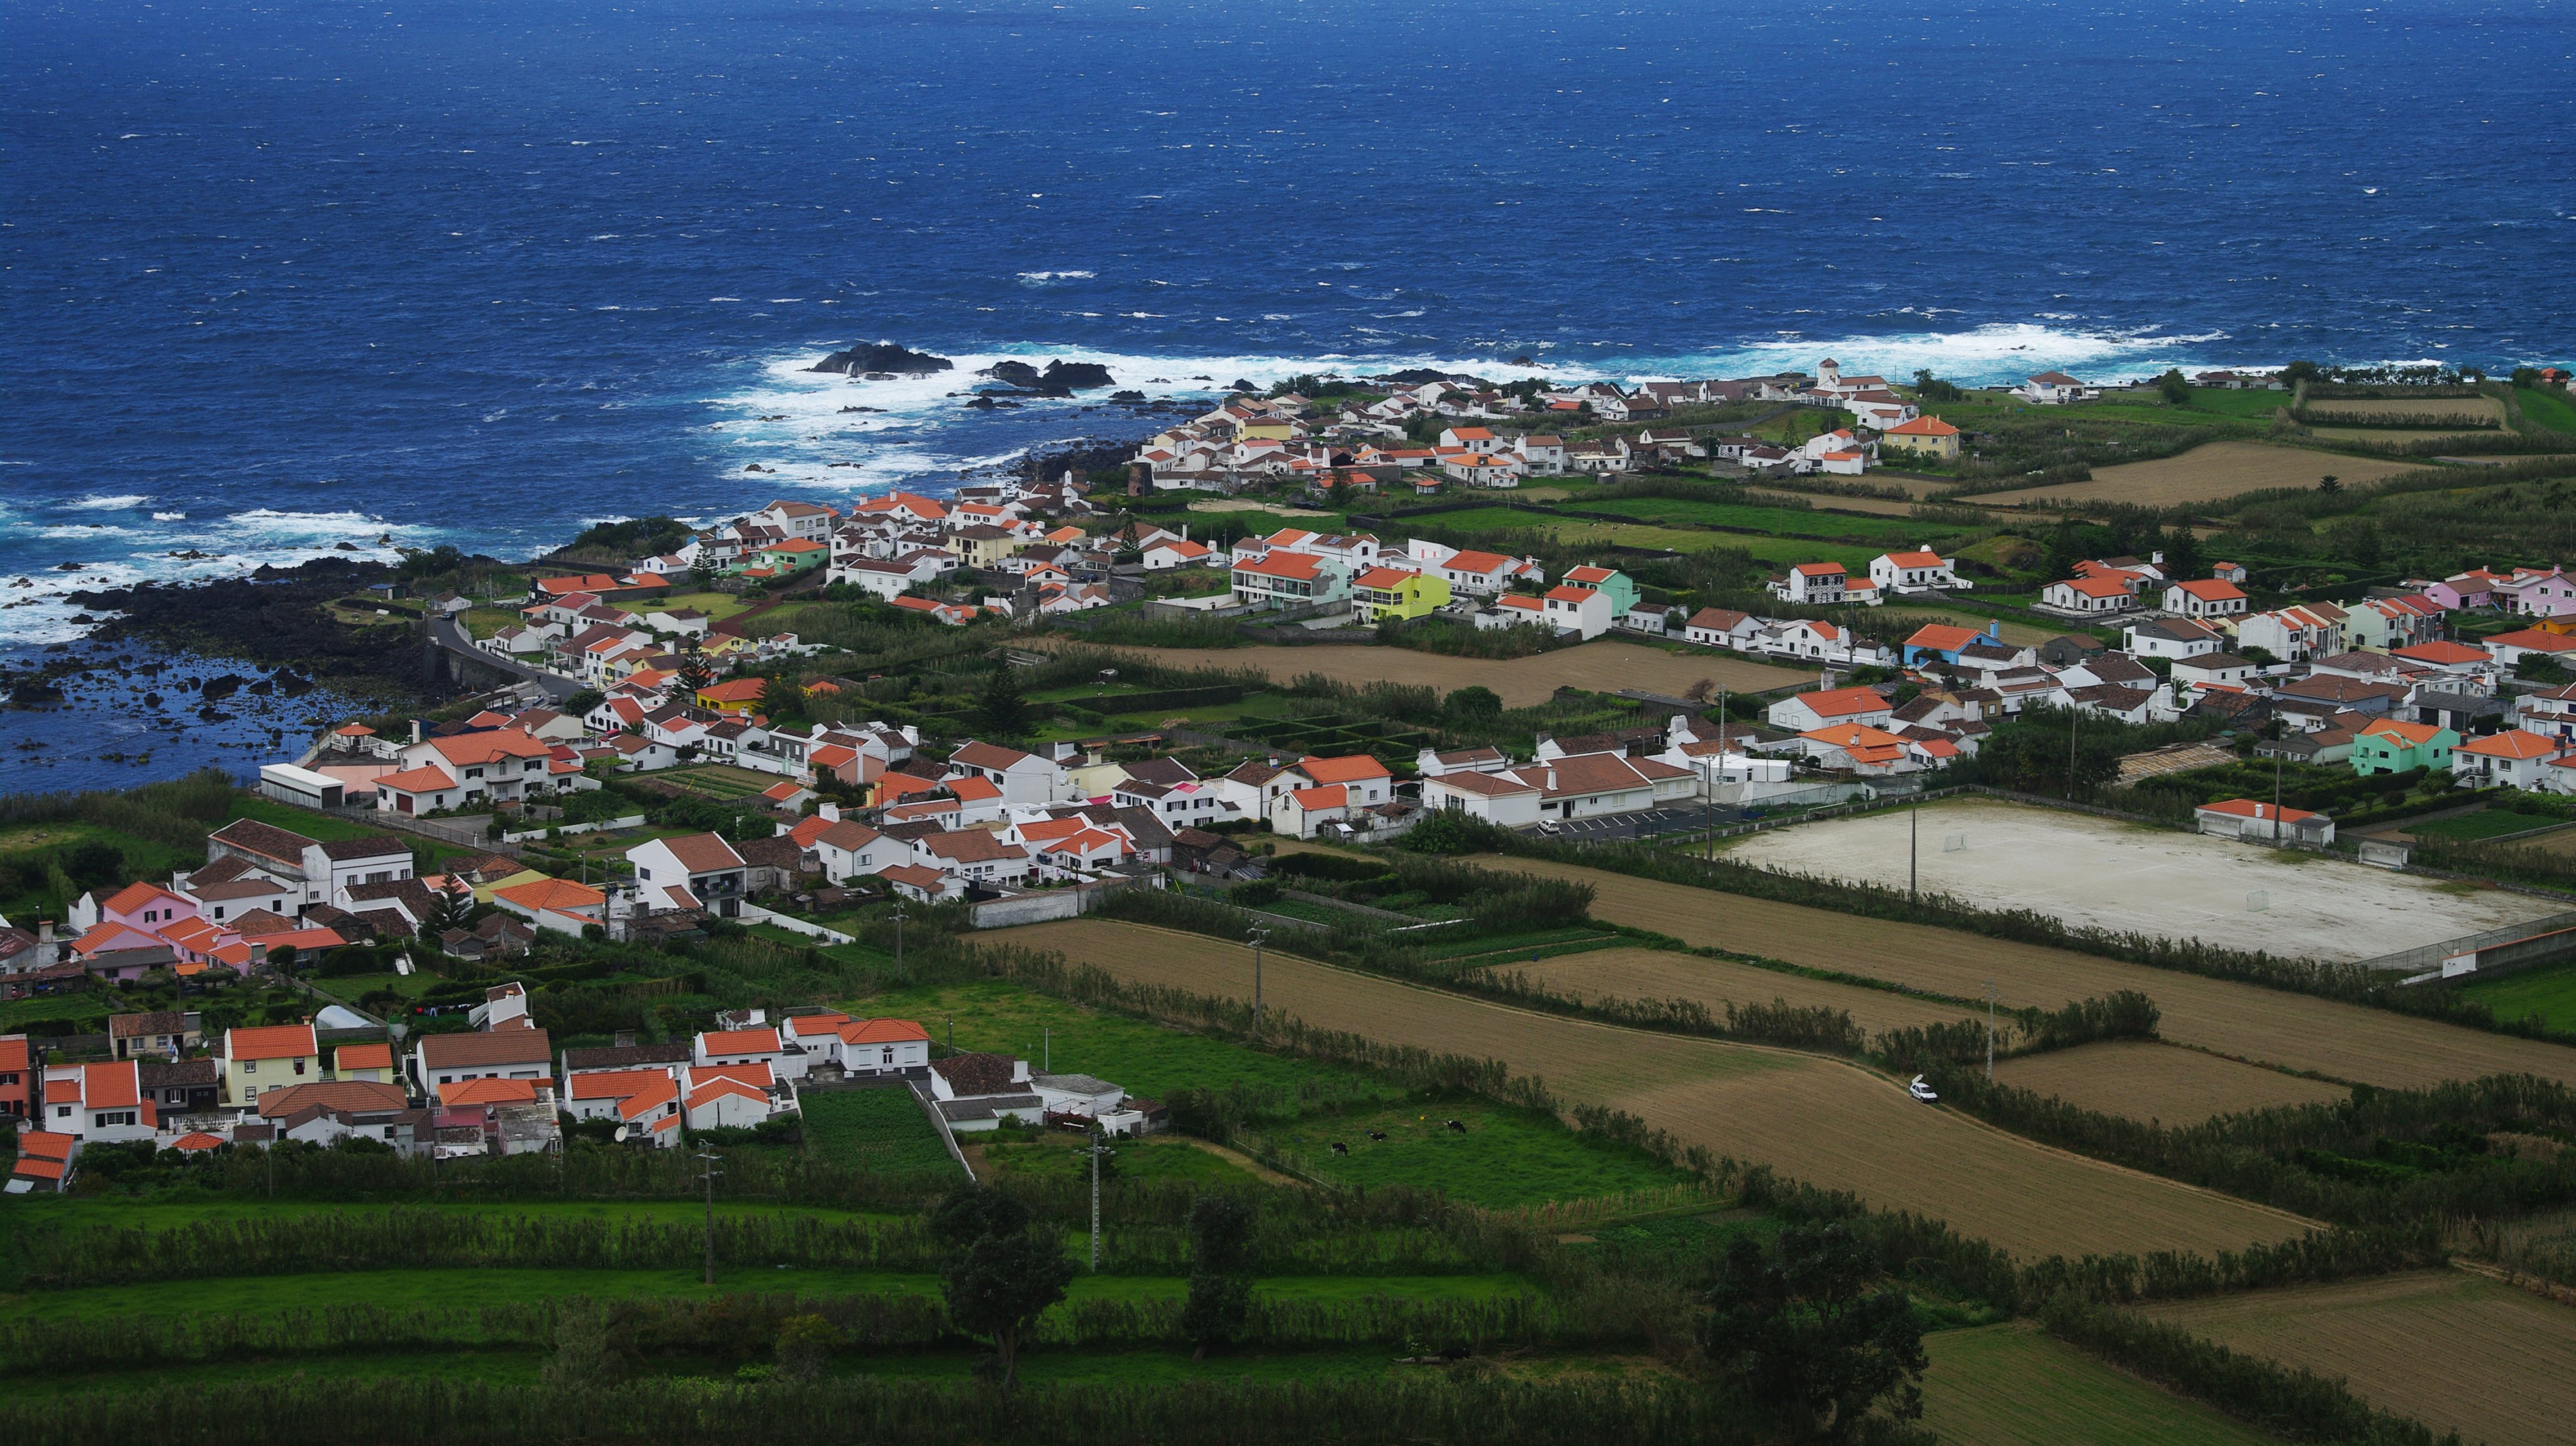 View of the coastal Mosteiros settlement from above the town, São Miguel